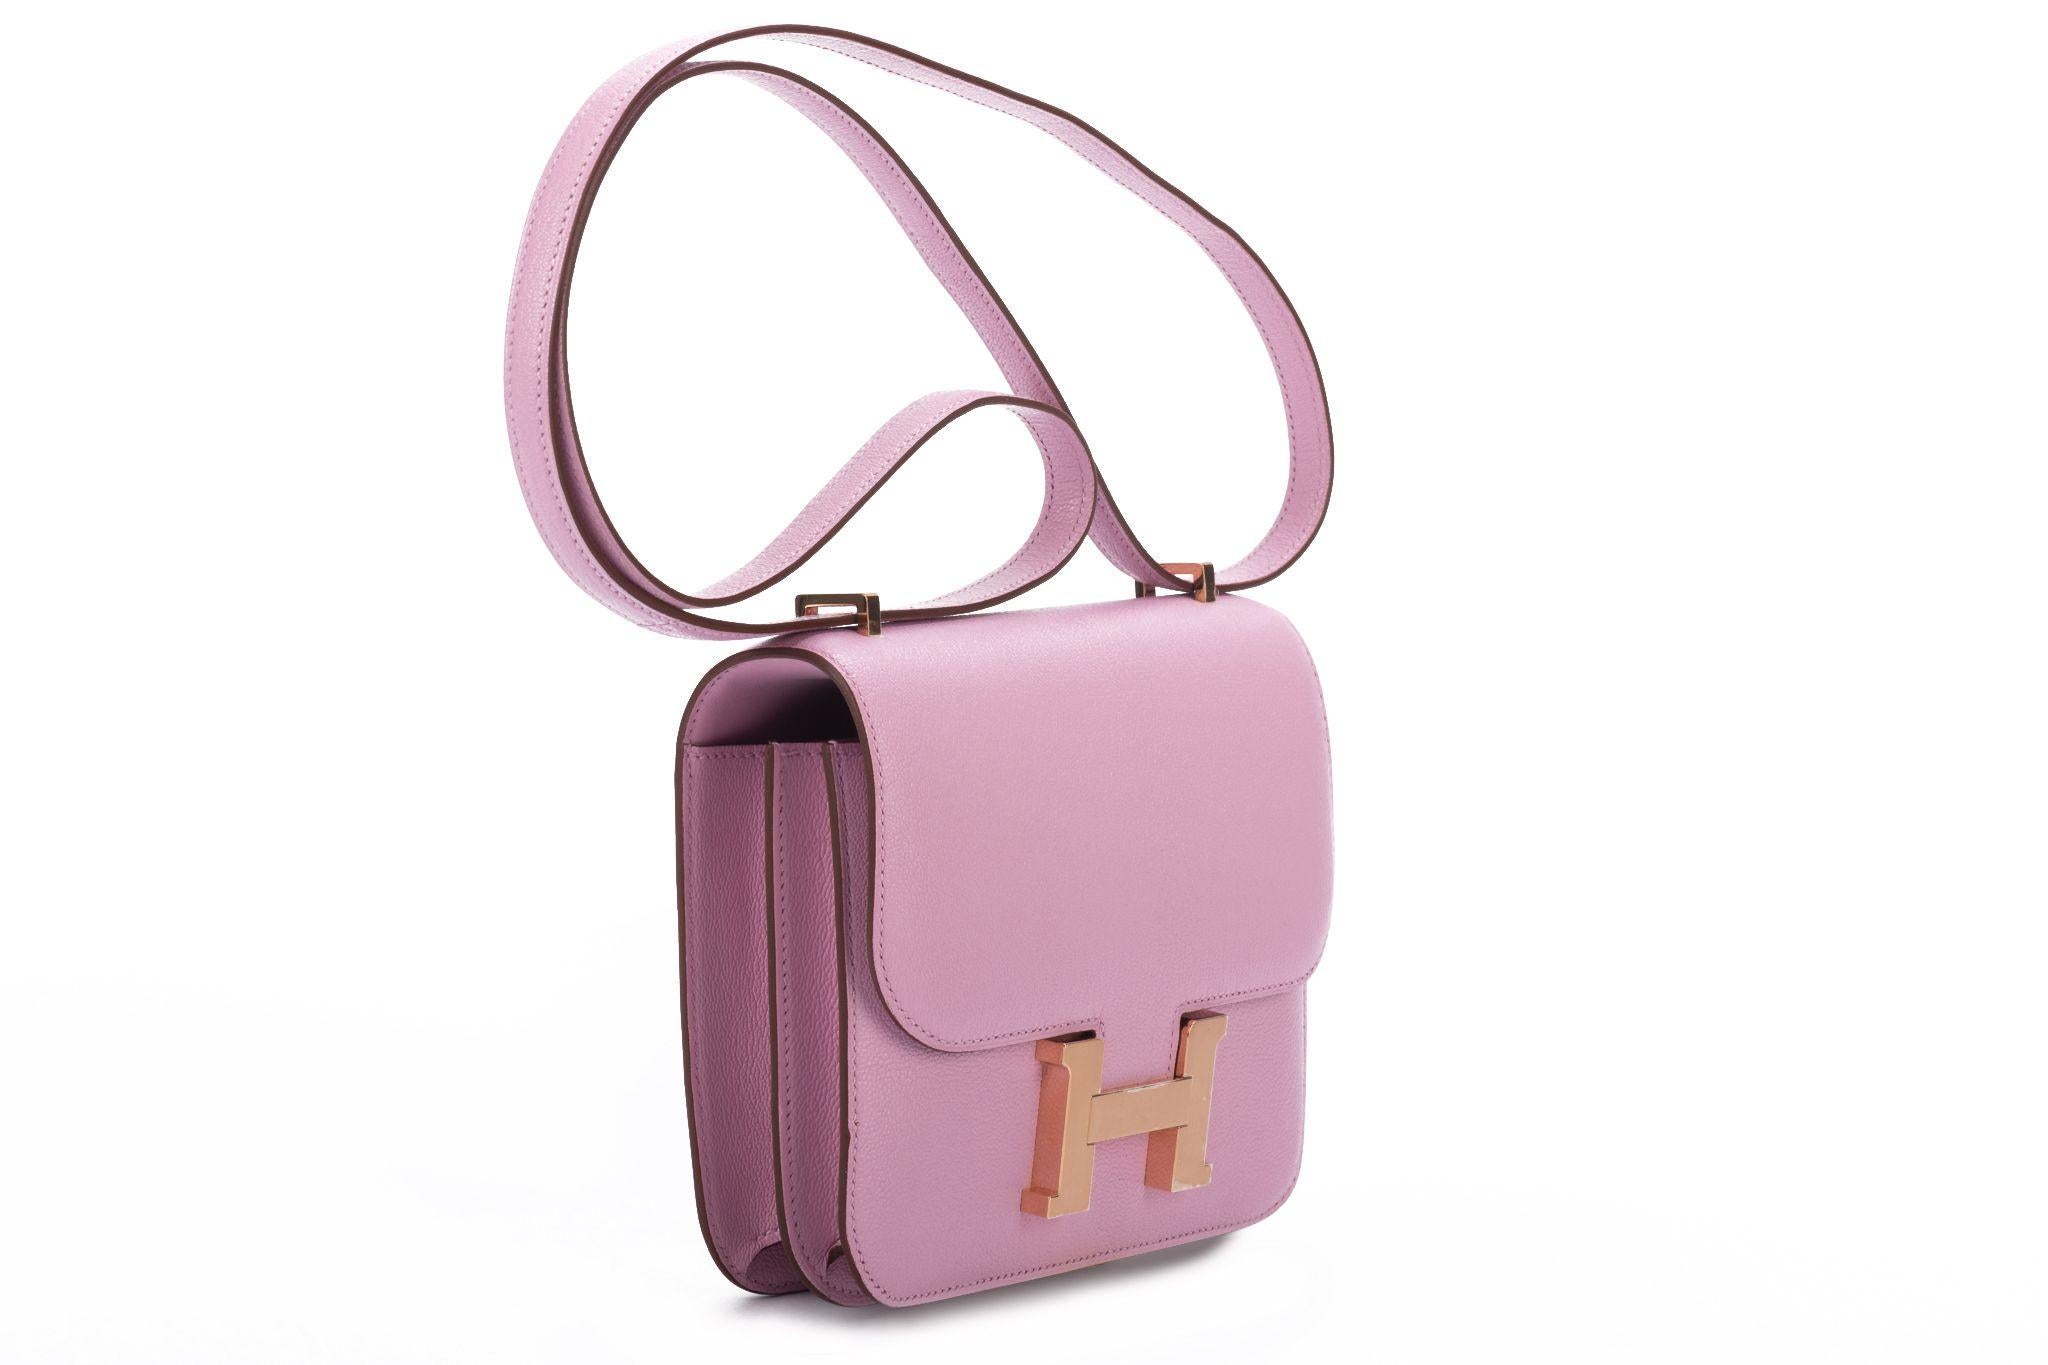 Hermes mini constance cross body 18cm in mauve goat skin leather and rose gold hardware. Date stamp U for 2022. Brand new in box with dust cover, booklet, felt.